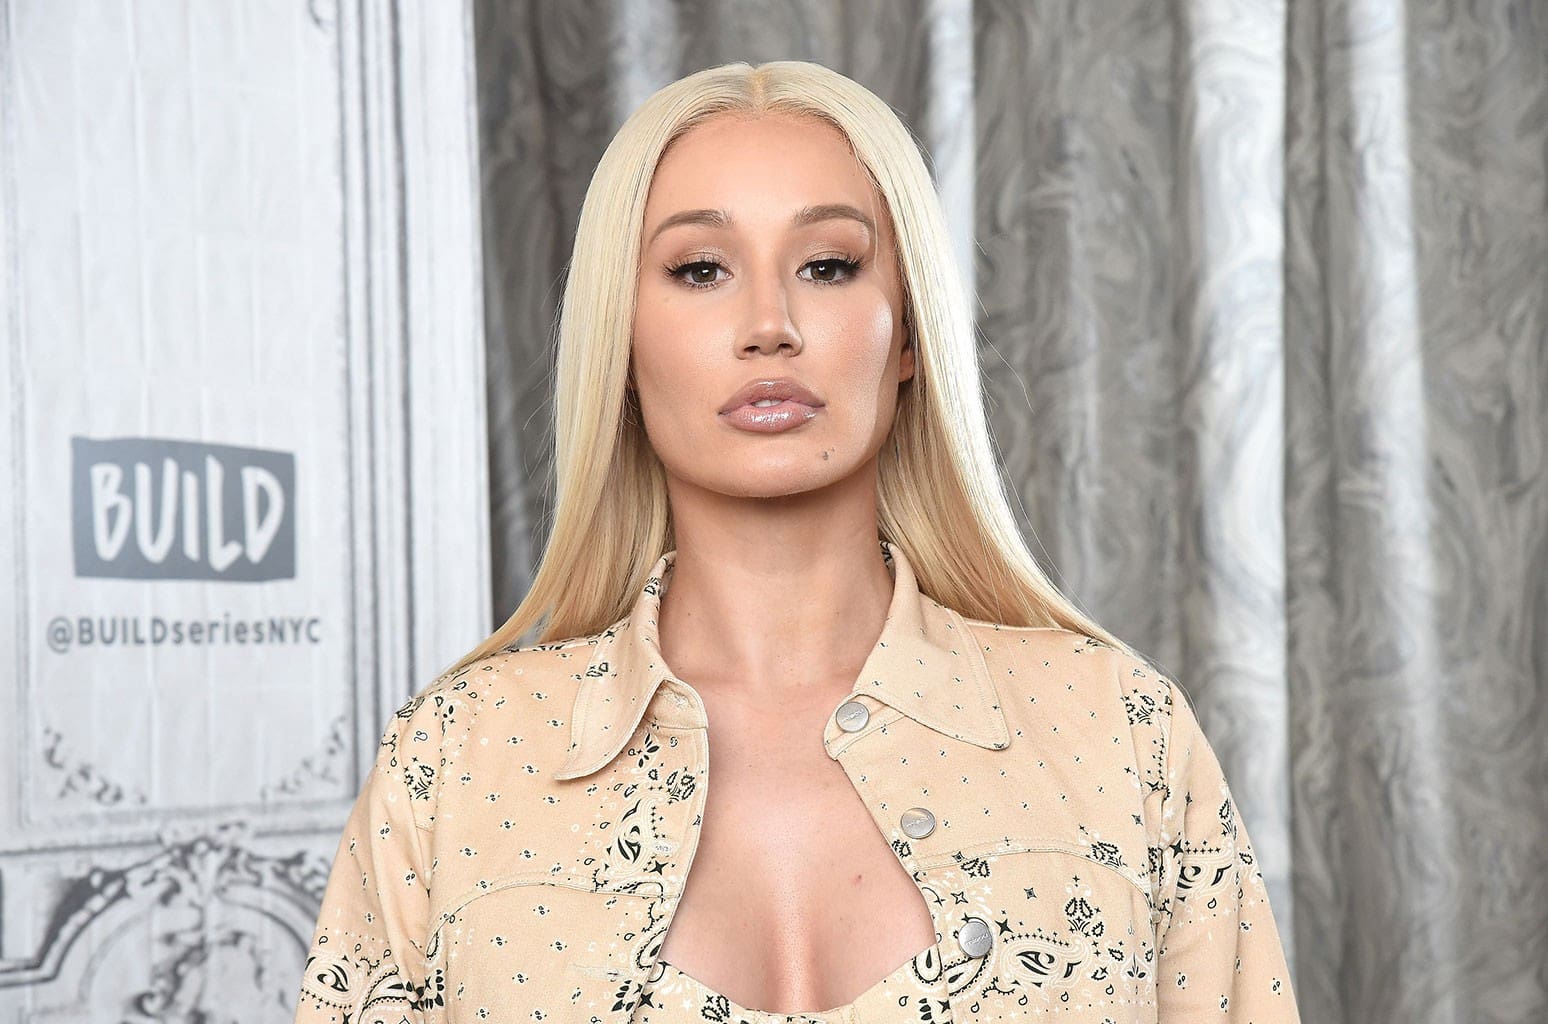 Iggy Azalea's Fans Are Offering Advice Following Her Health Concern